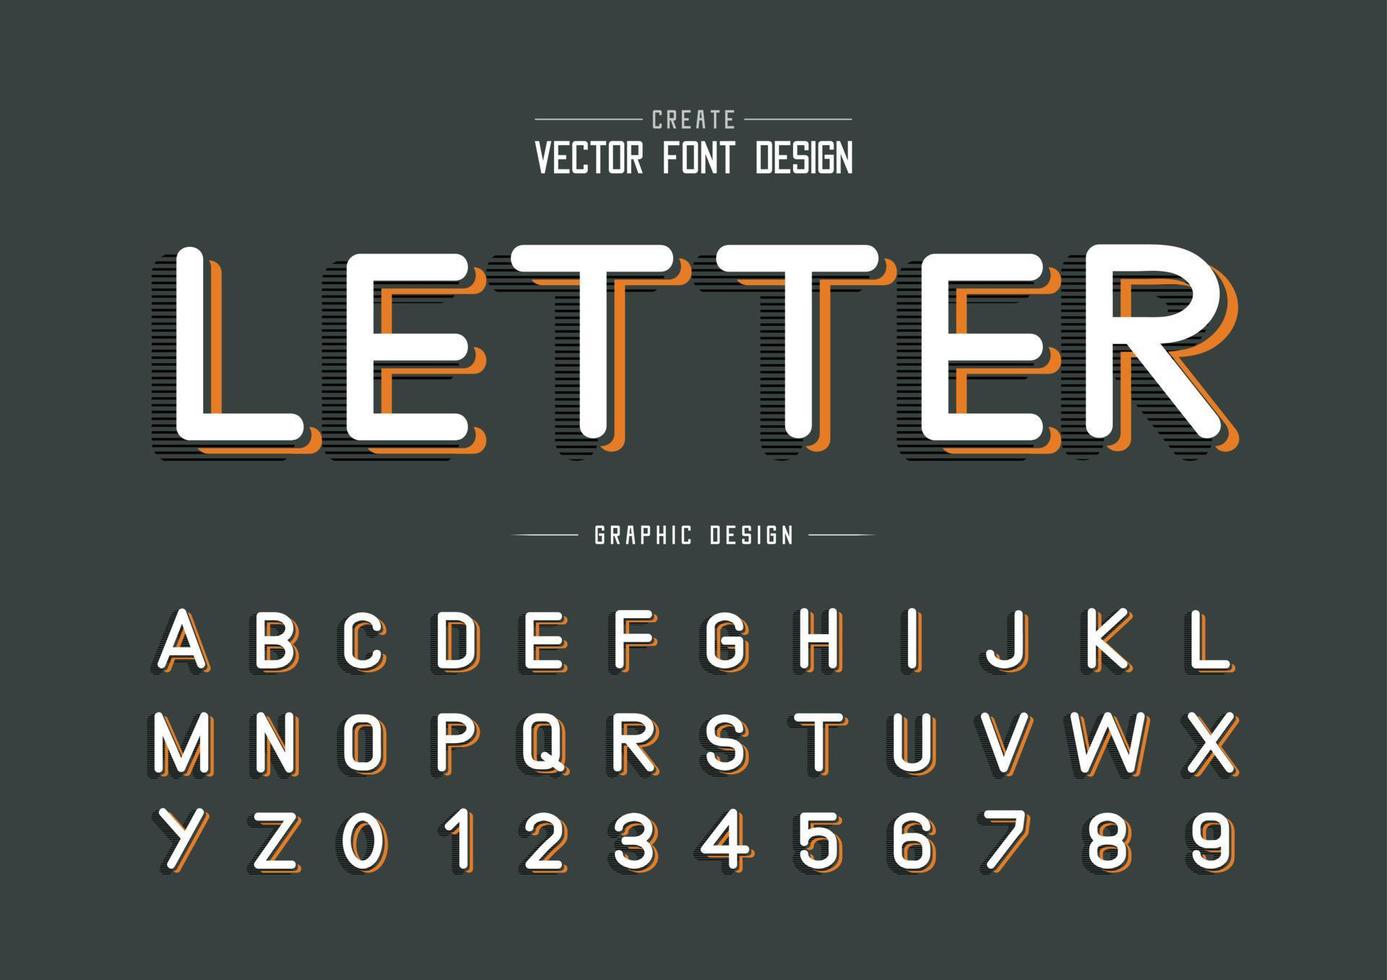 Font and alphabet vector, Typeface letter and number design, Graphic text on background vector